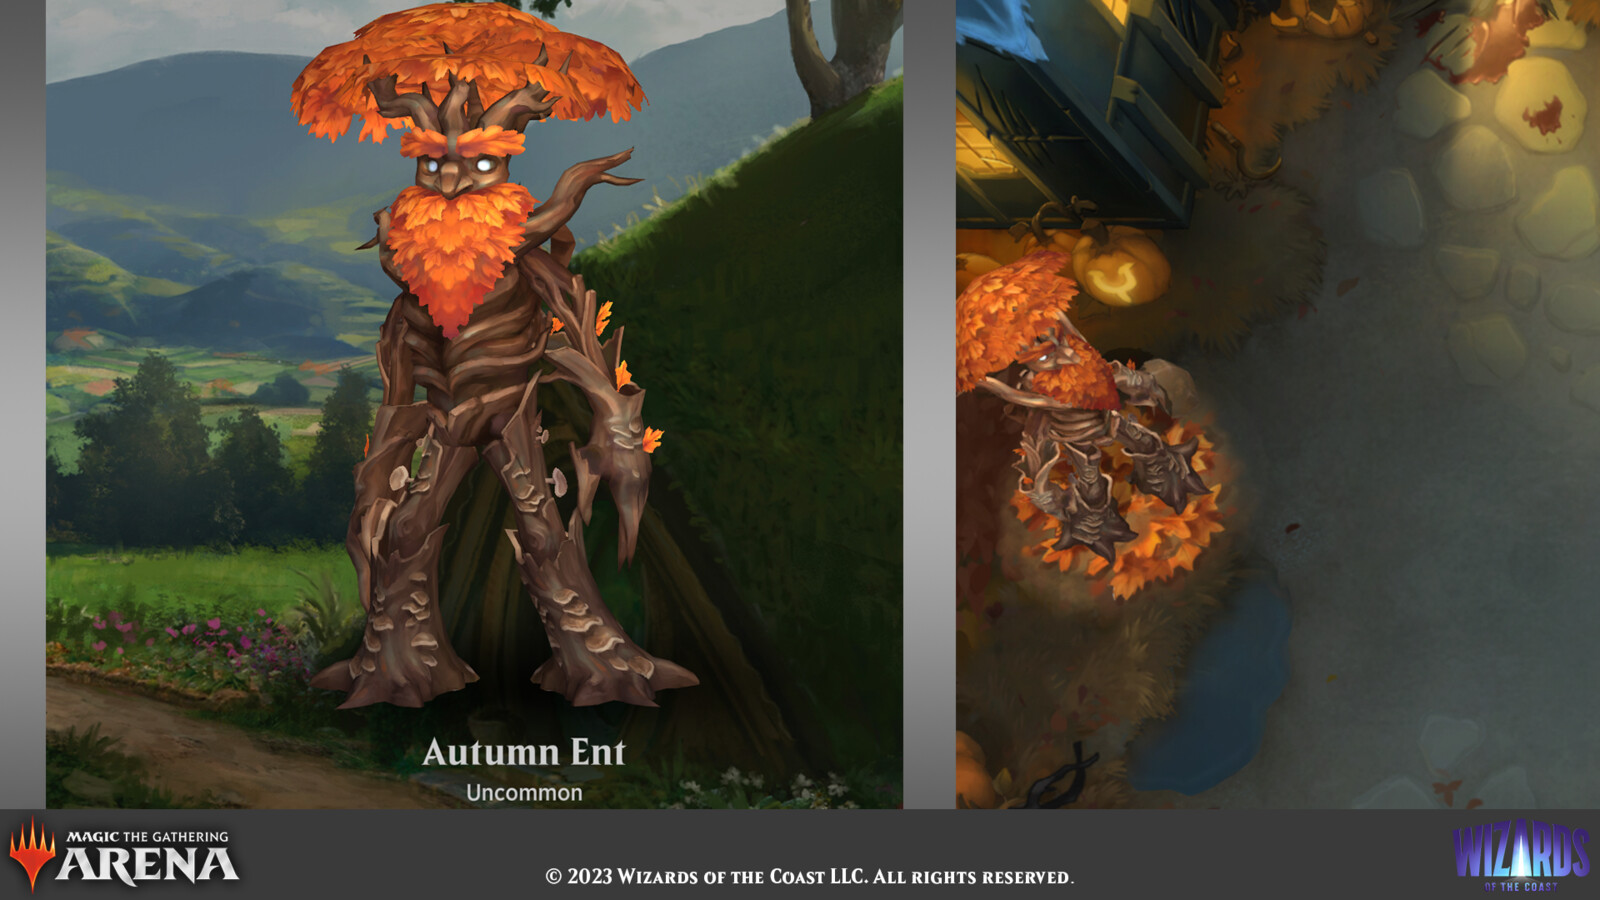 Select pet and game views for the Autumn Ent